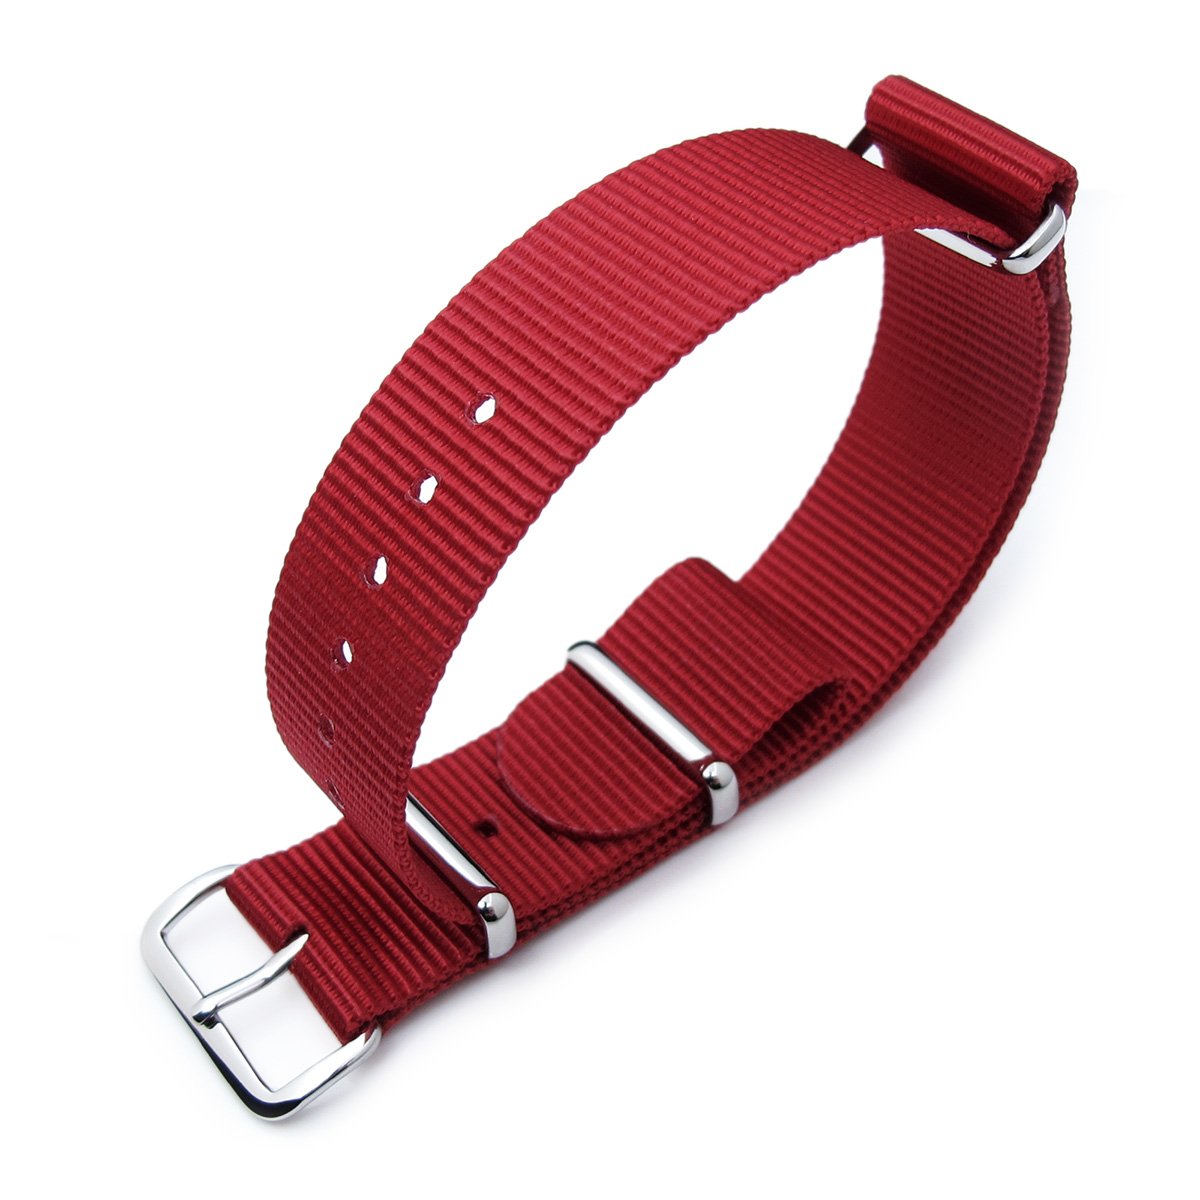 MiLTAT 18mm or 20mm G10 Military Watch Strap Ballistic Nylon Armband Polished Red Strapcode Watch Bands